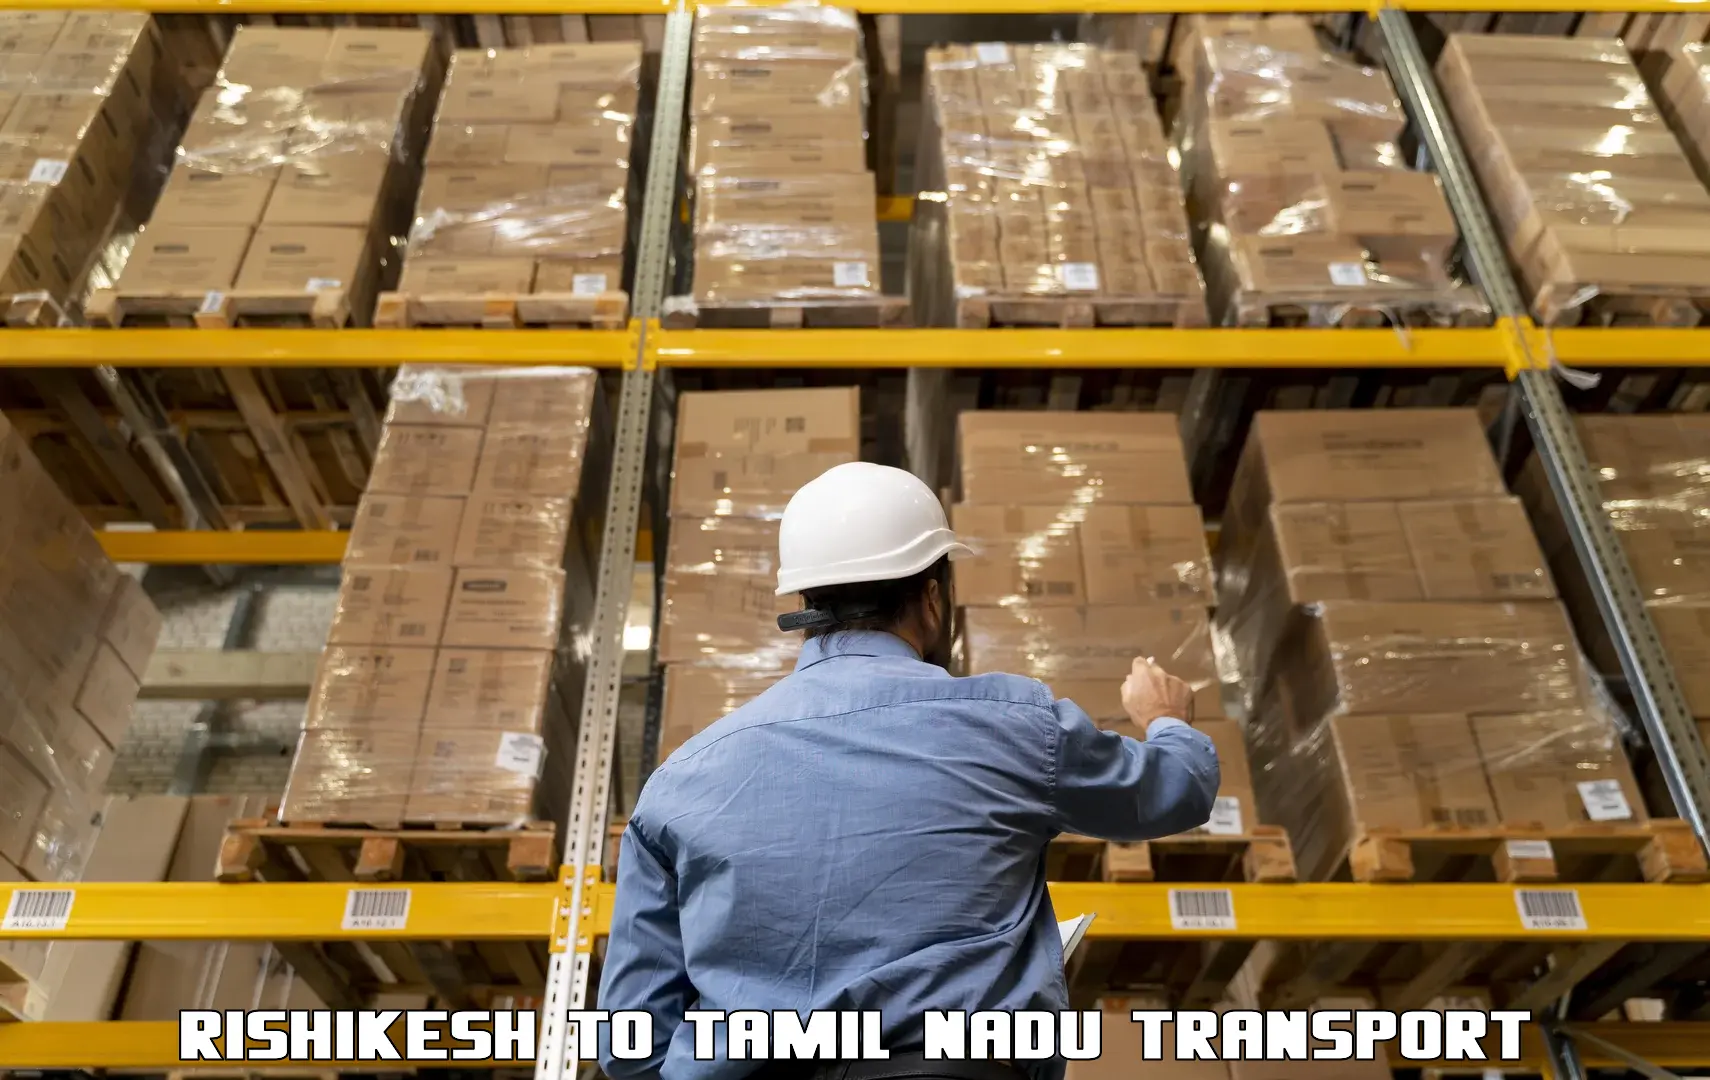 Parcel transport services Rishikesh to Ennore Port Chennai